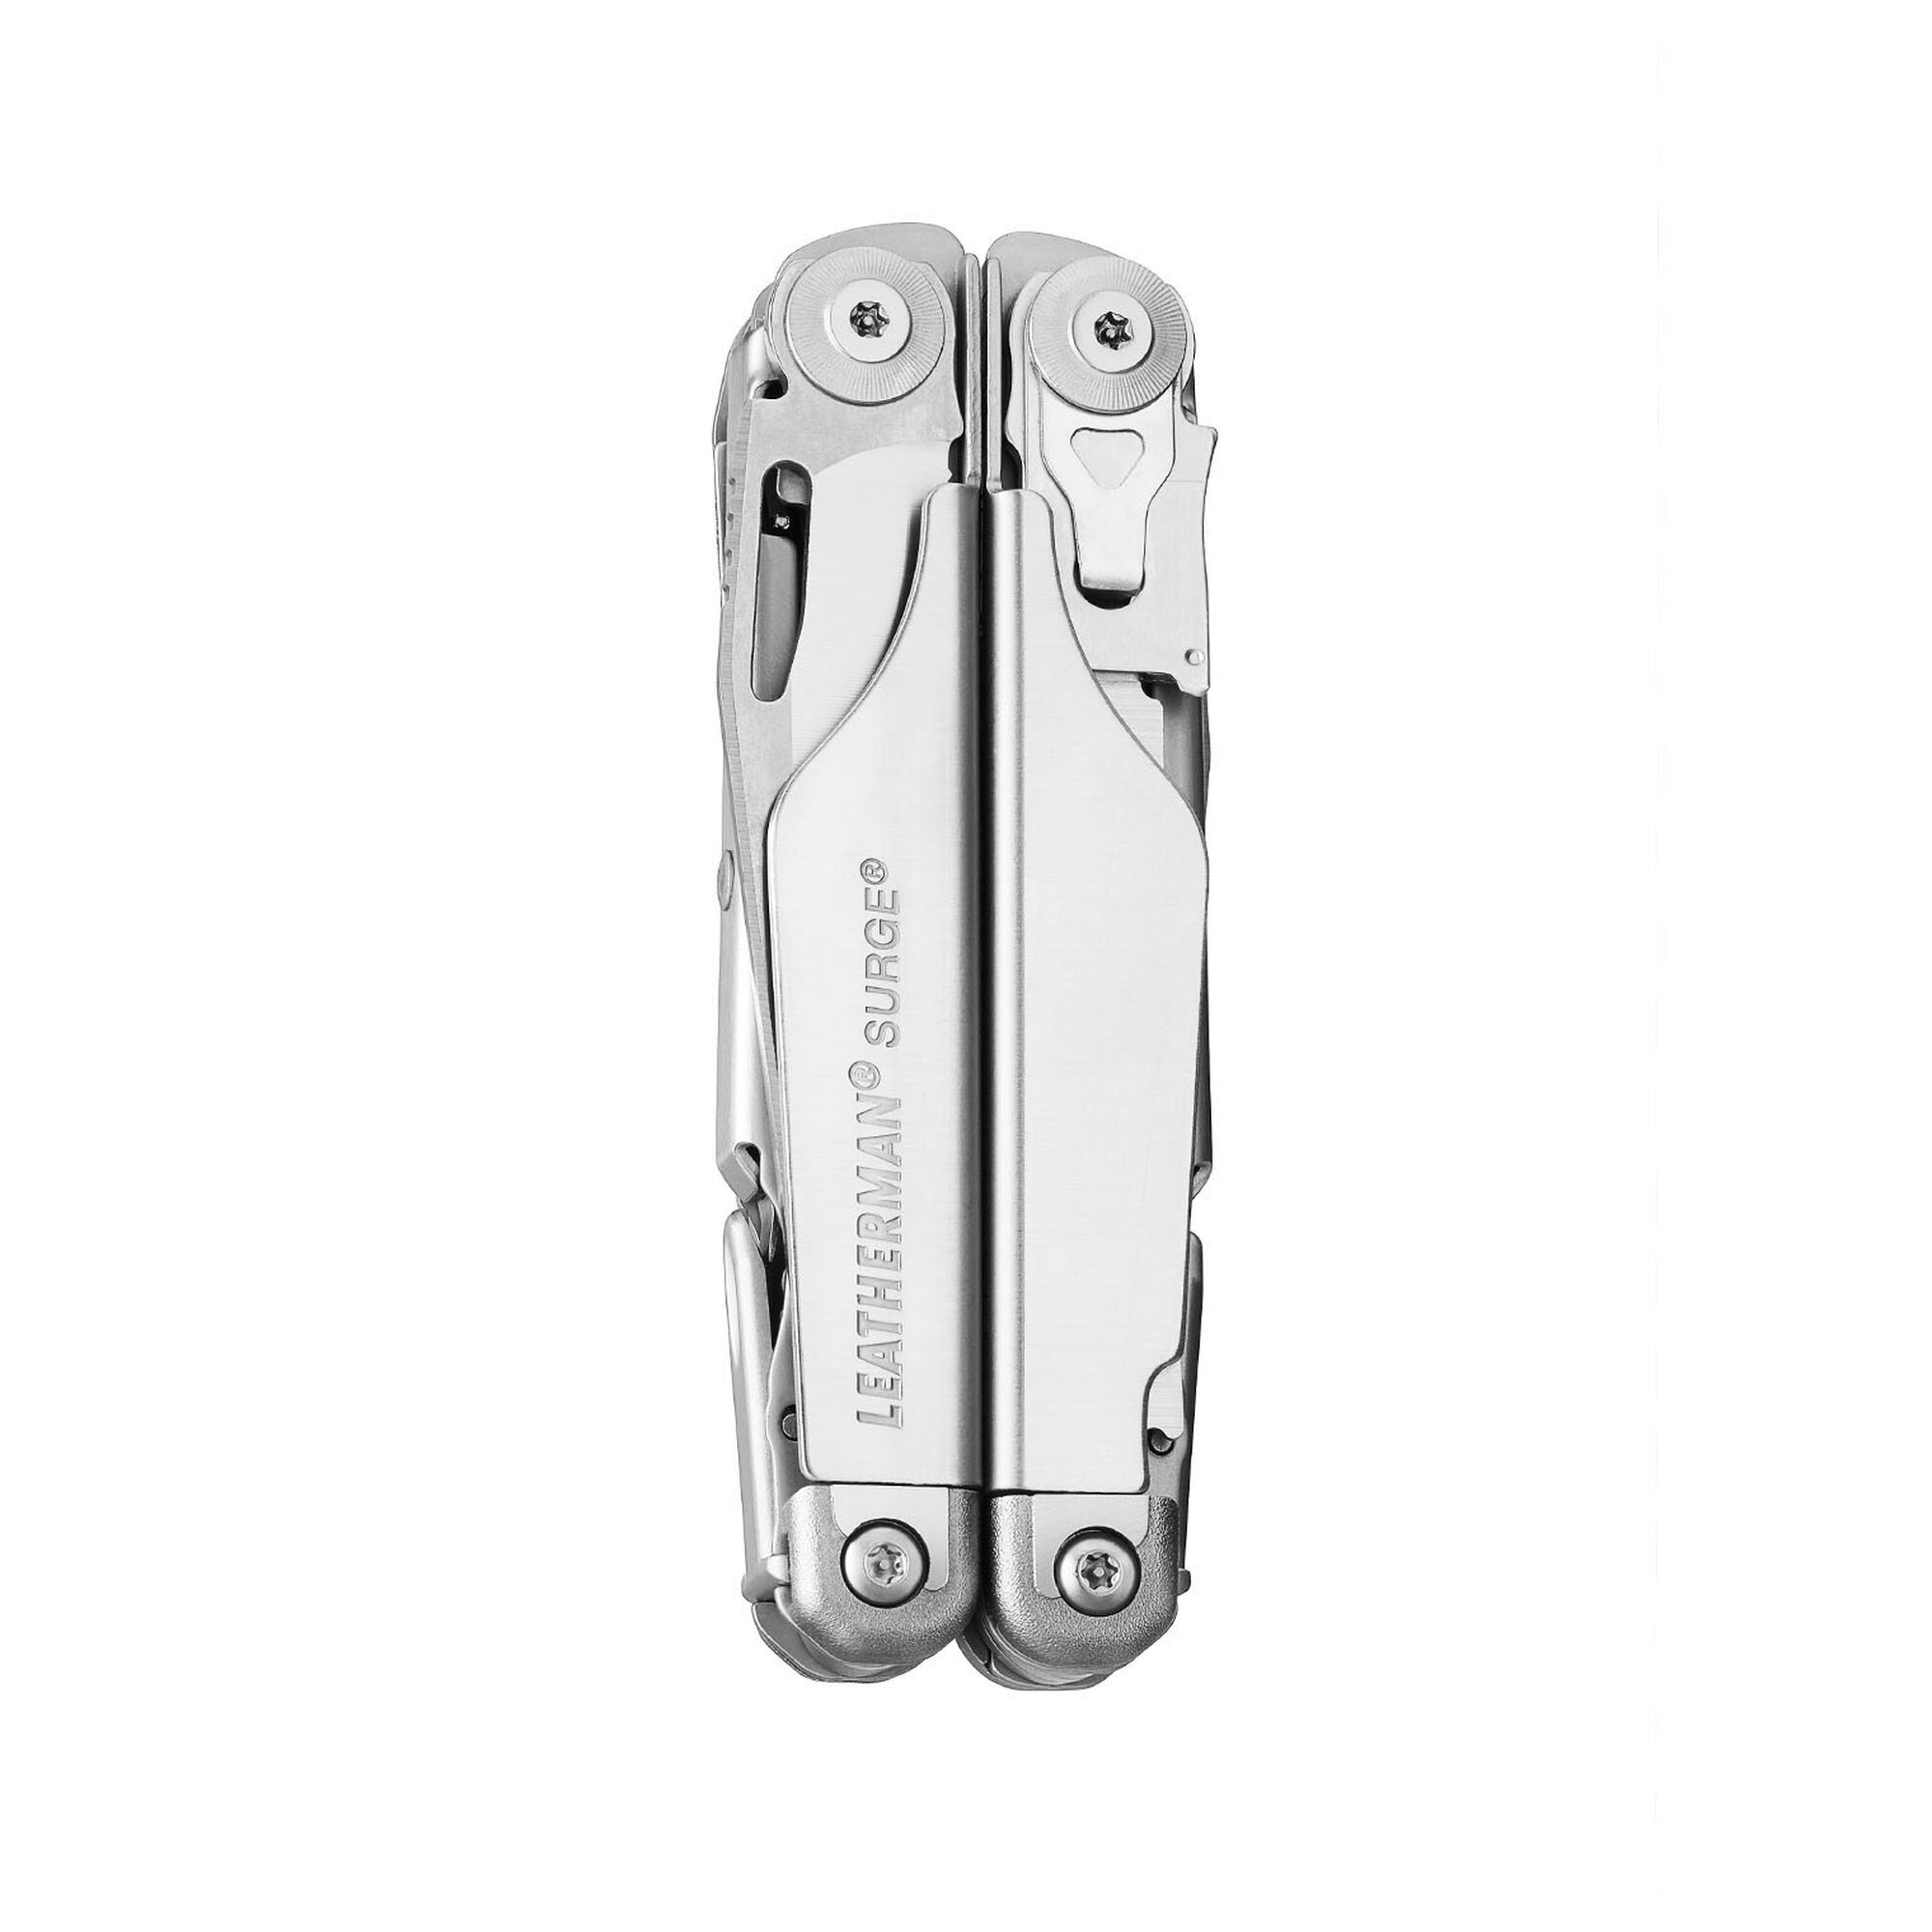 Leatherman Parts Mod Replacement for Signal multi-tool genuine